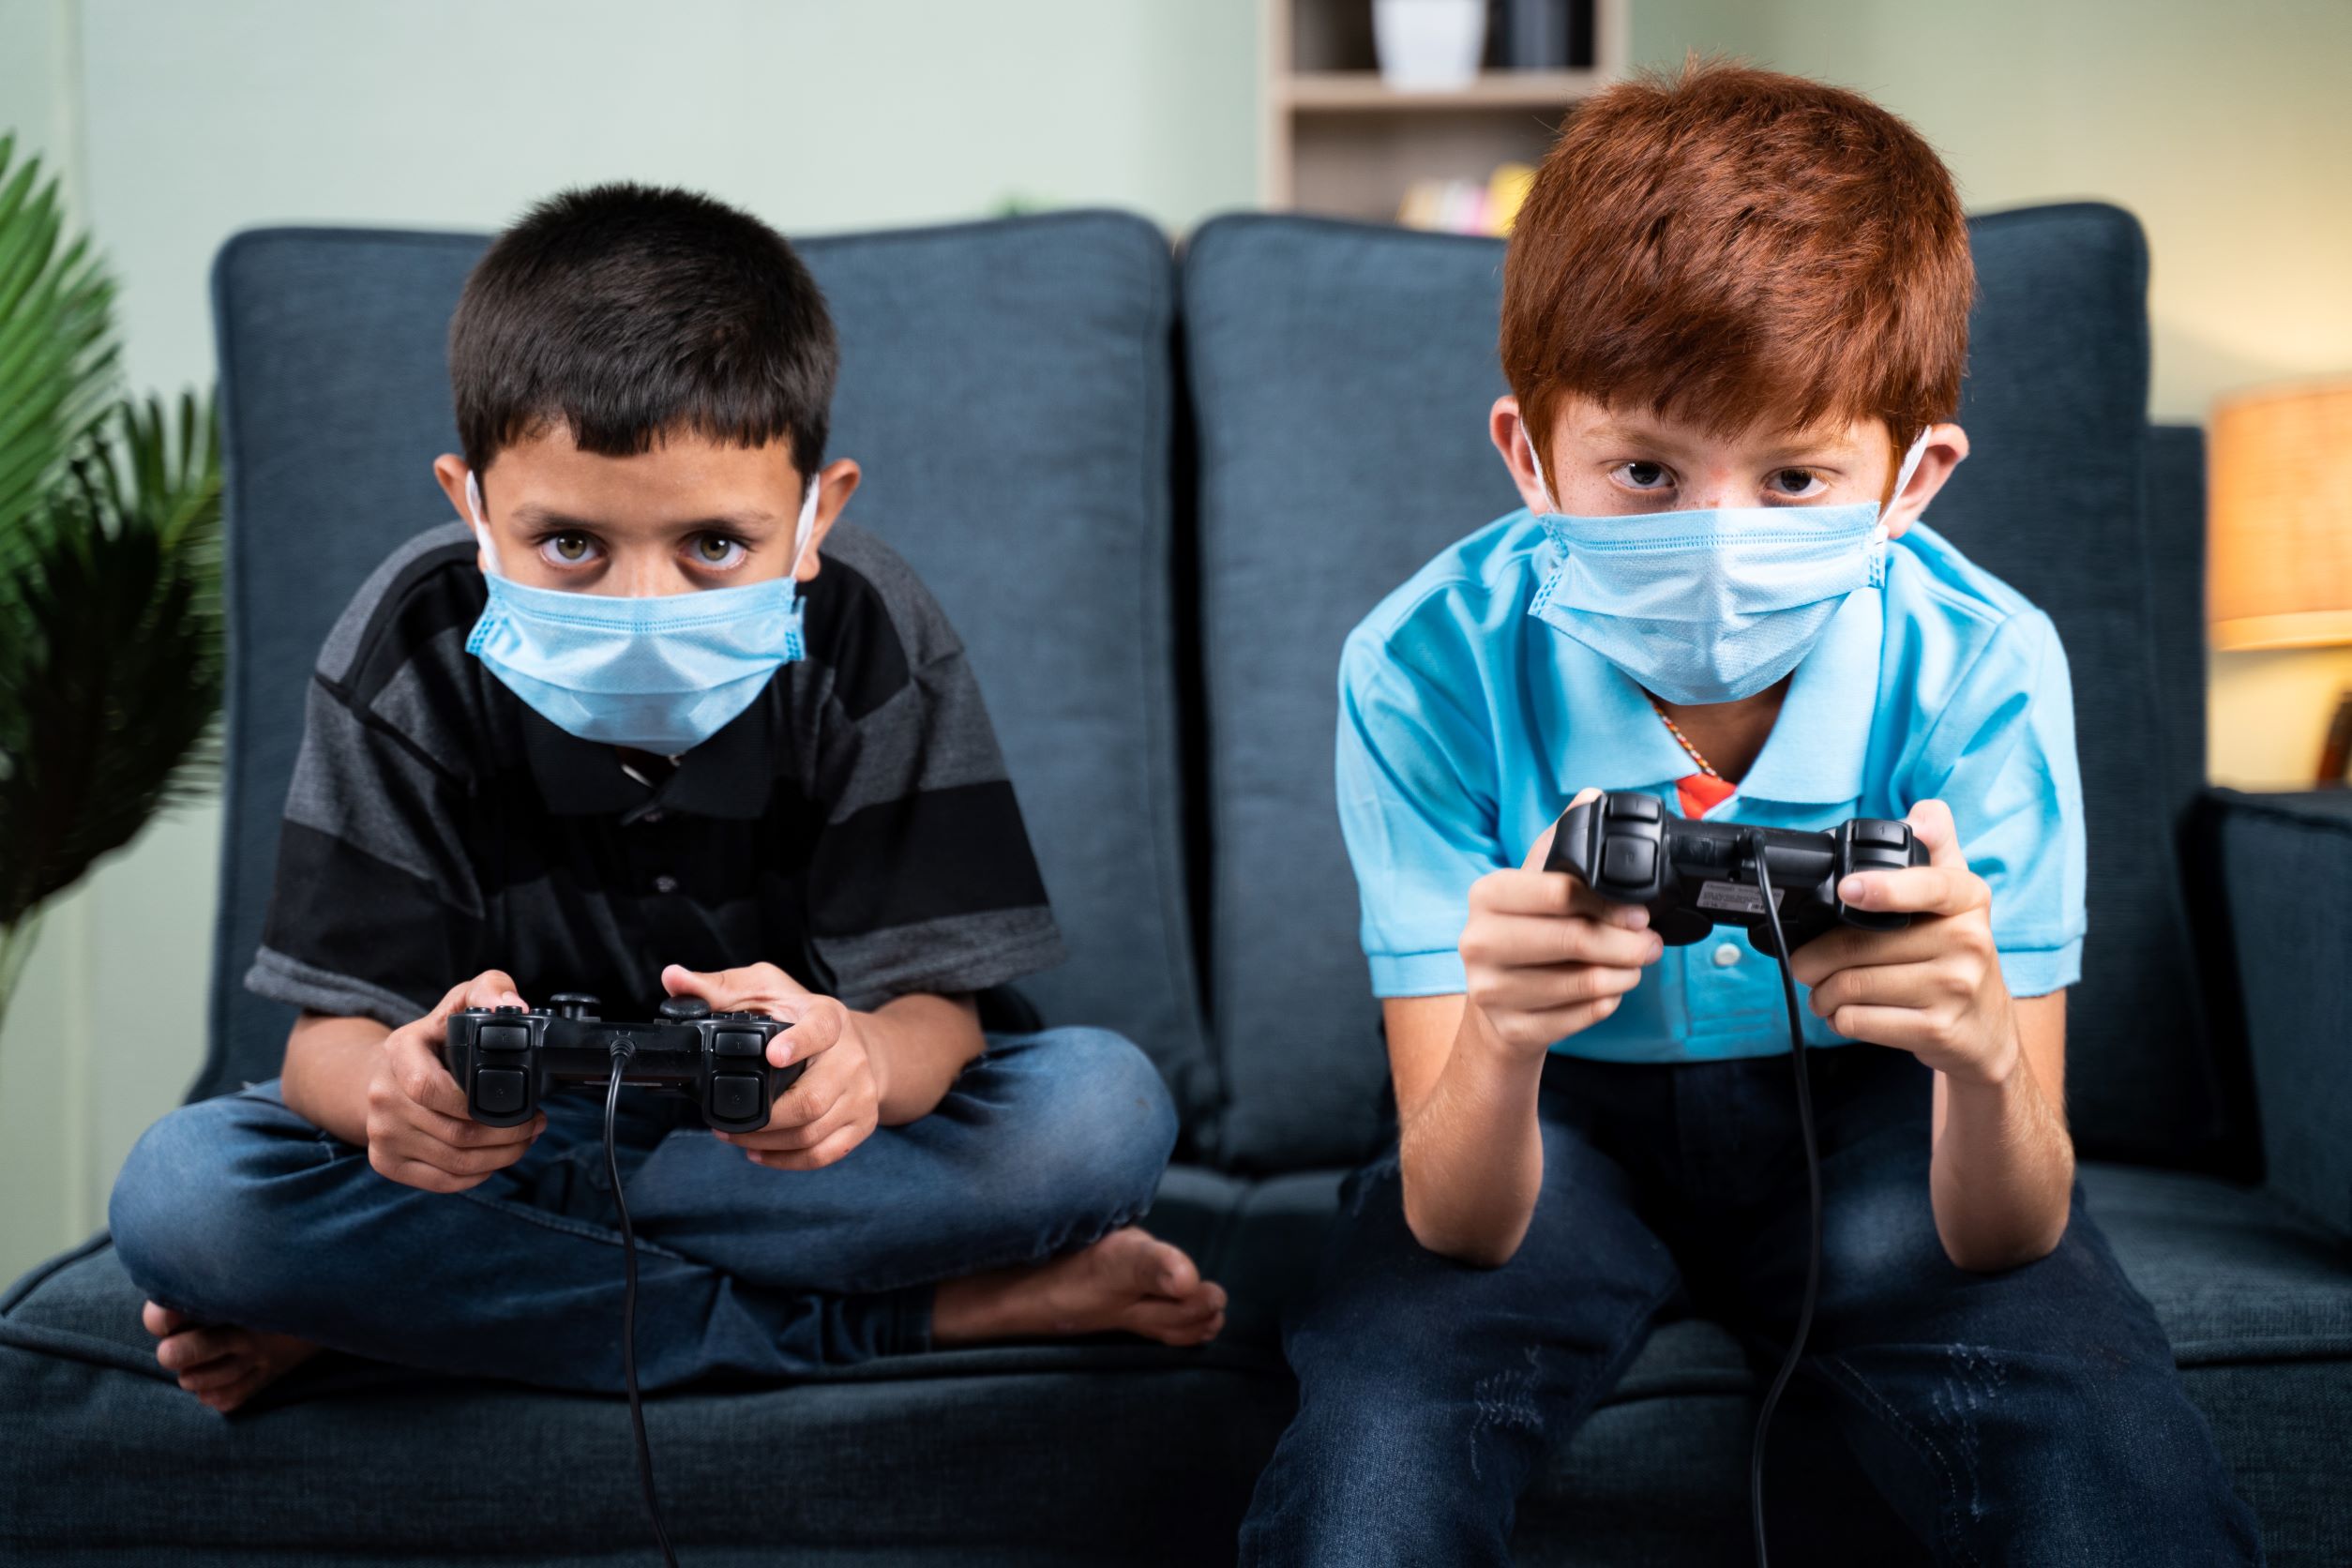 Where Has Your Tween Been During the Pandemic? On This Gaming Site